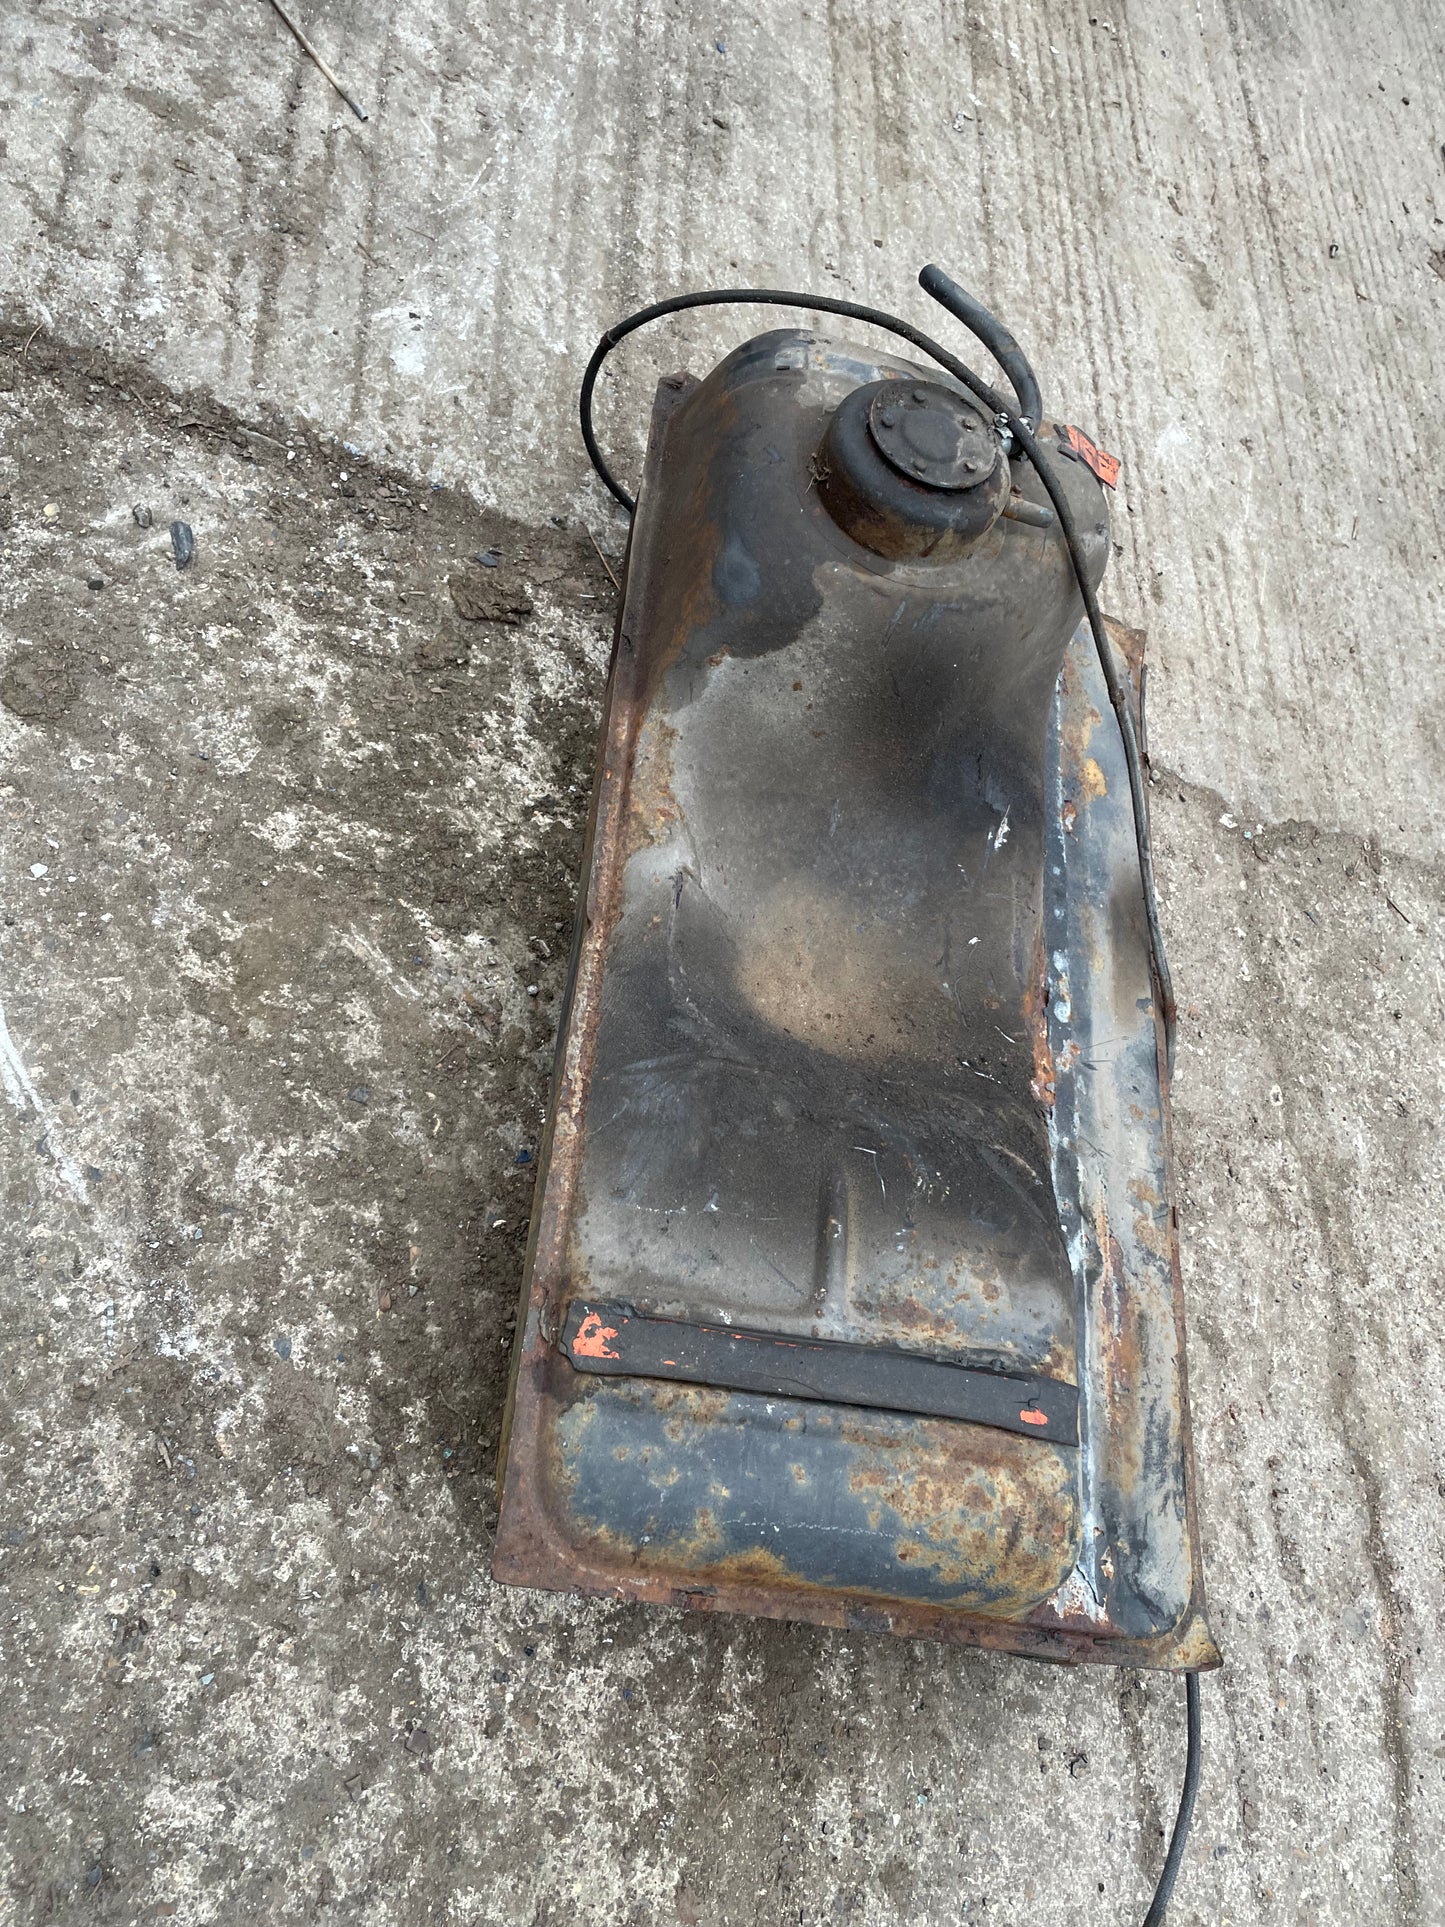 Porsche 924 Metal Fuel tank for early cars